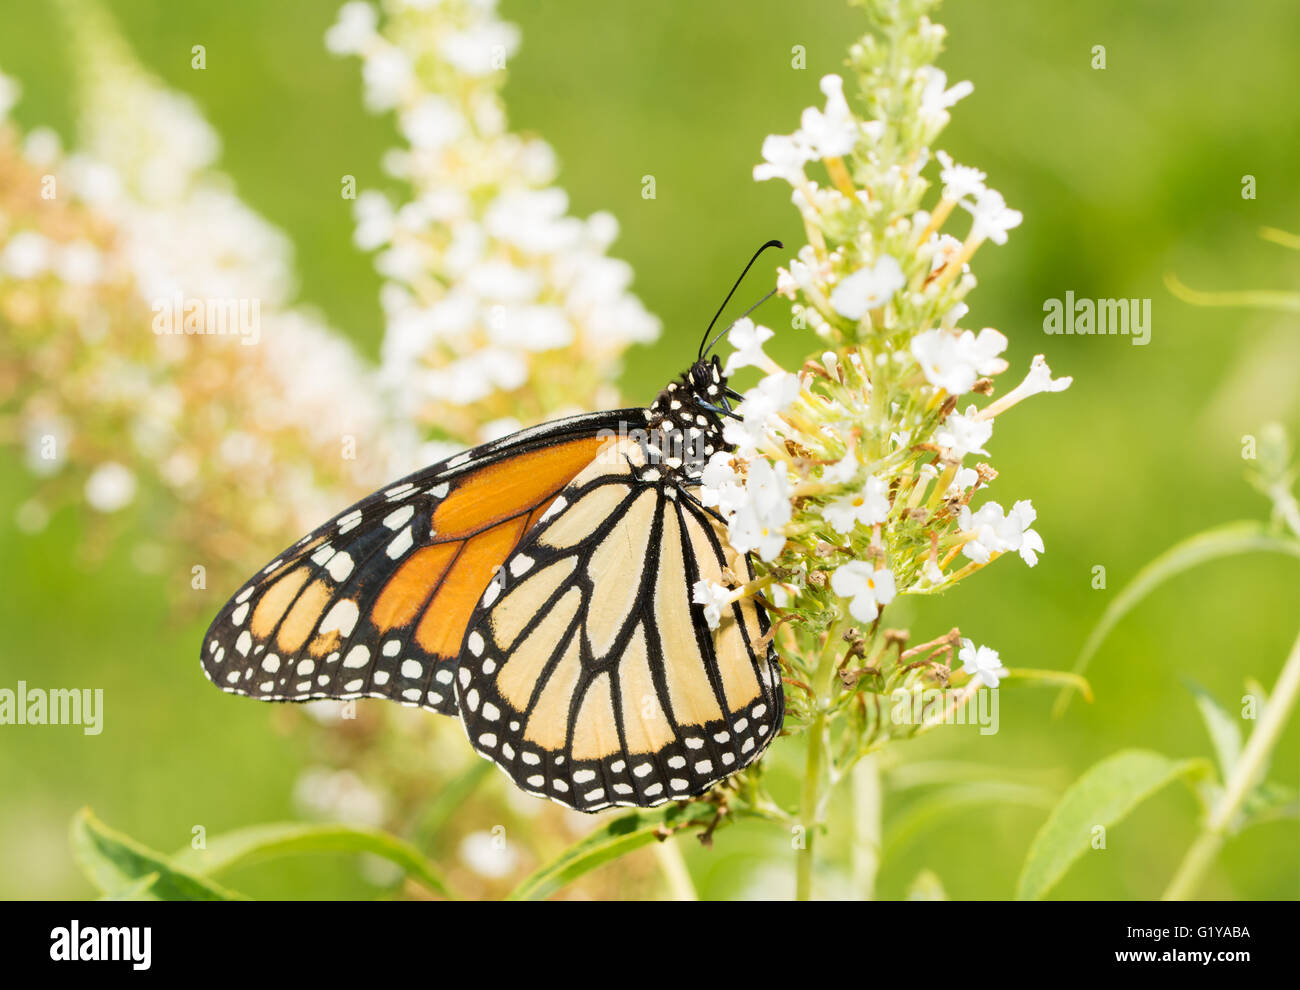 Female Monarch butterfly on a white Butterflybush flower cluster Stock Photo